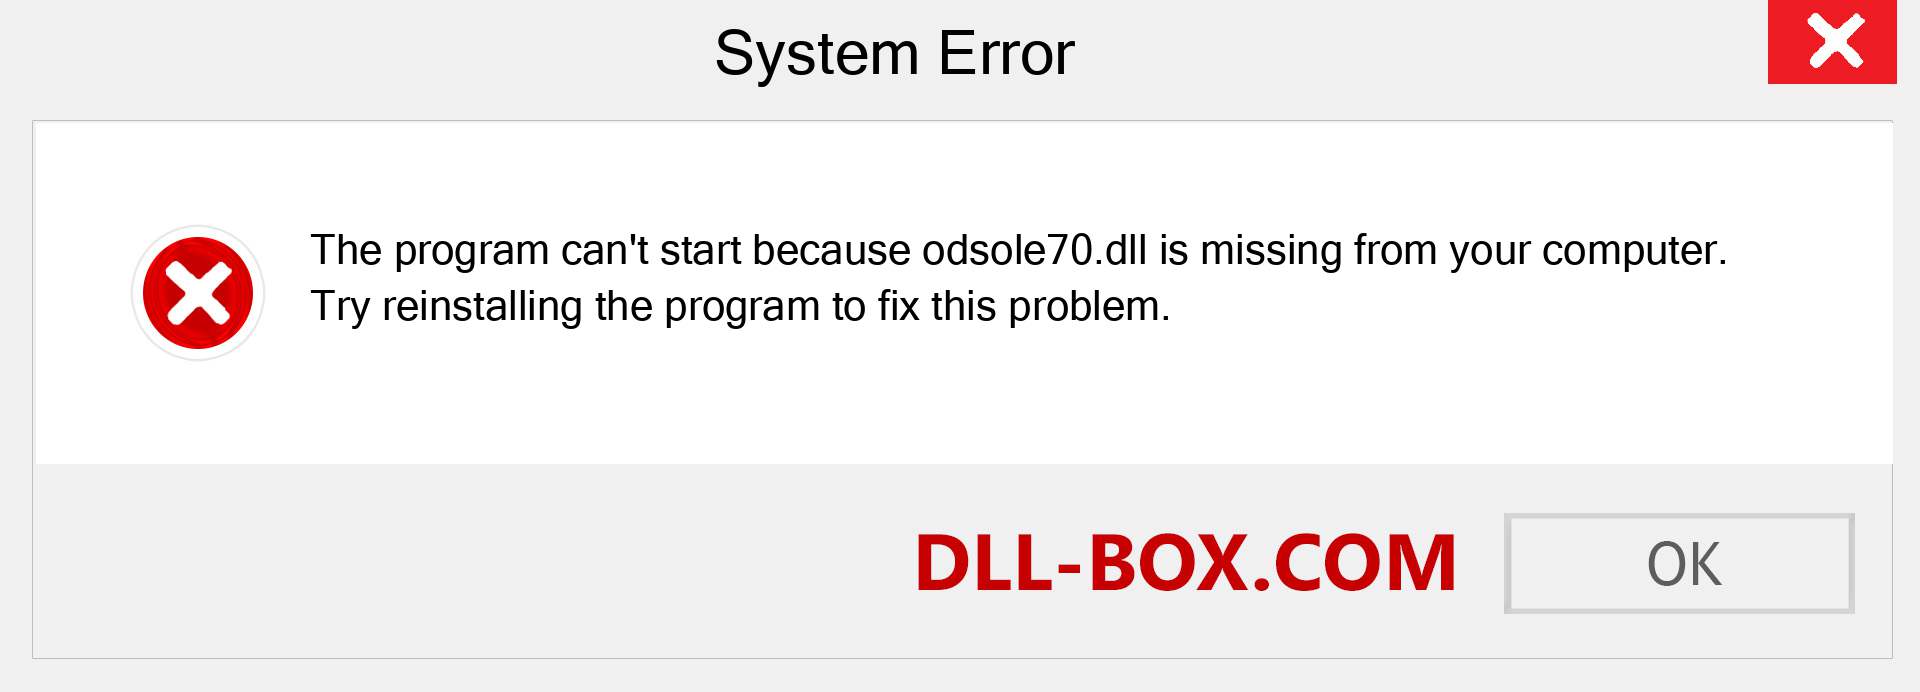  odsole70.dll file is missing?. Download for Windows 7, 8, 10 - Fix  odsole70 dll Missing Error on Windows, photos, images